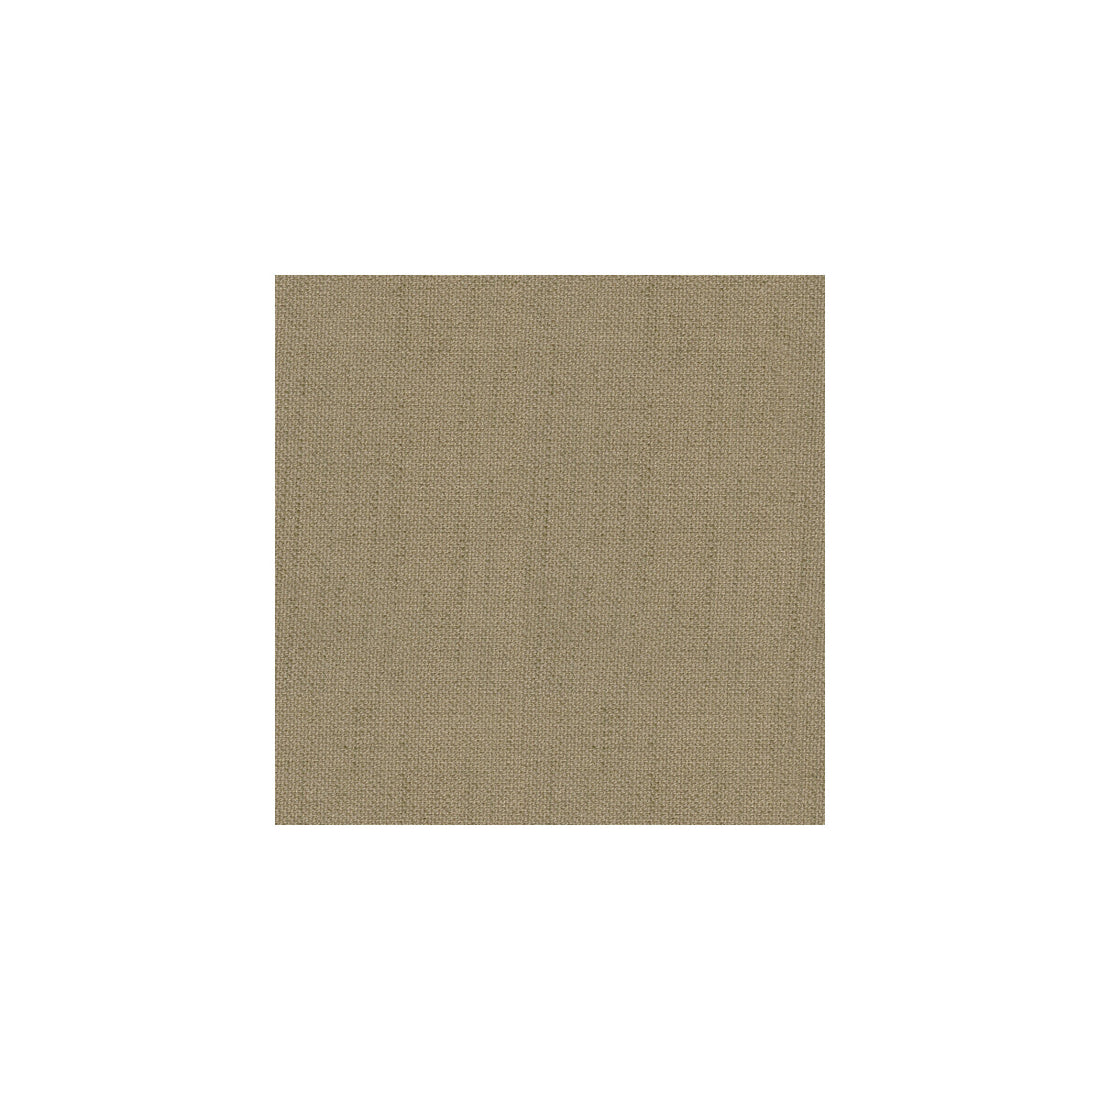 Soho Solid fabric in natural color - pattern 32255.106.0 - by Kravet Smart